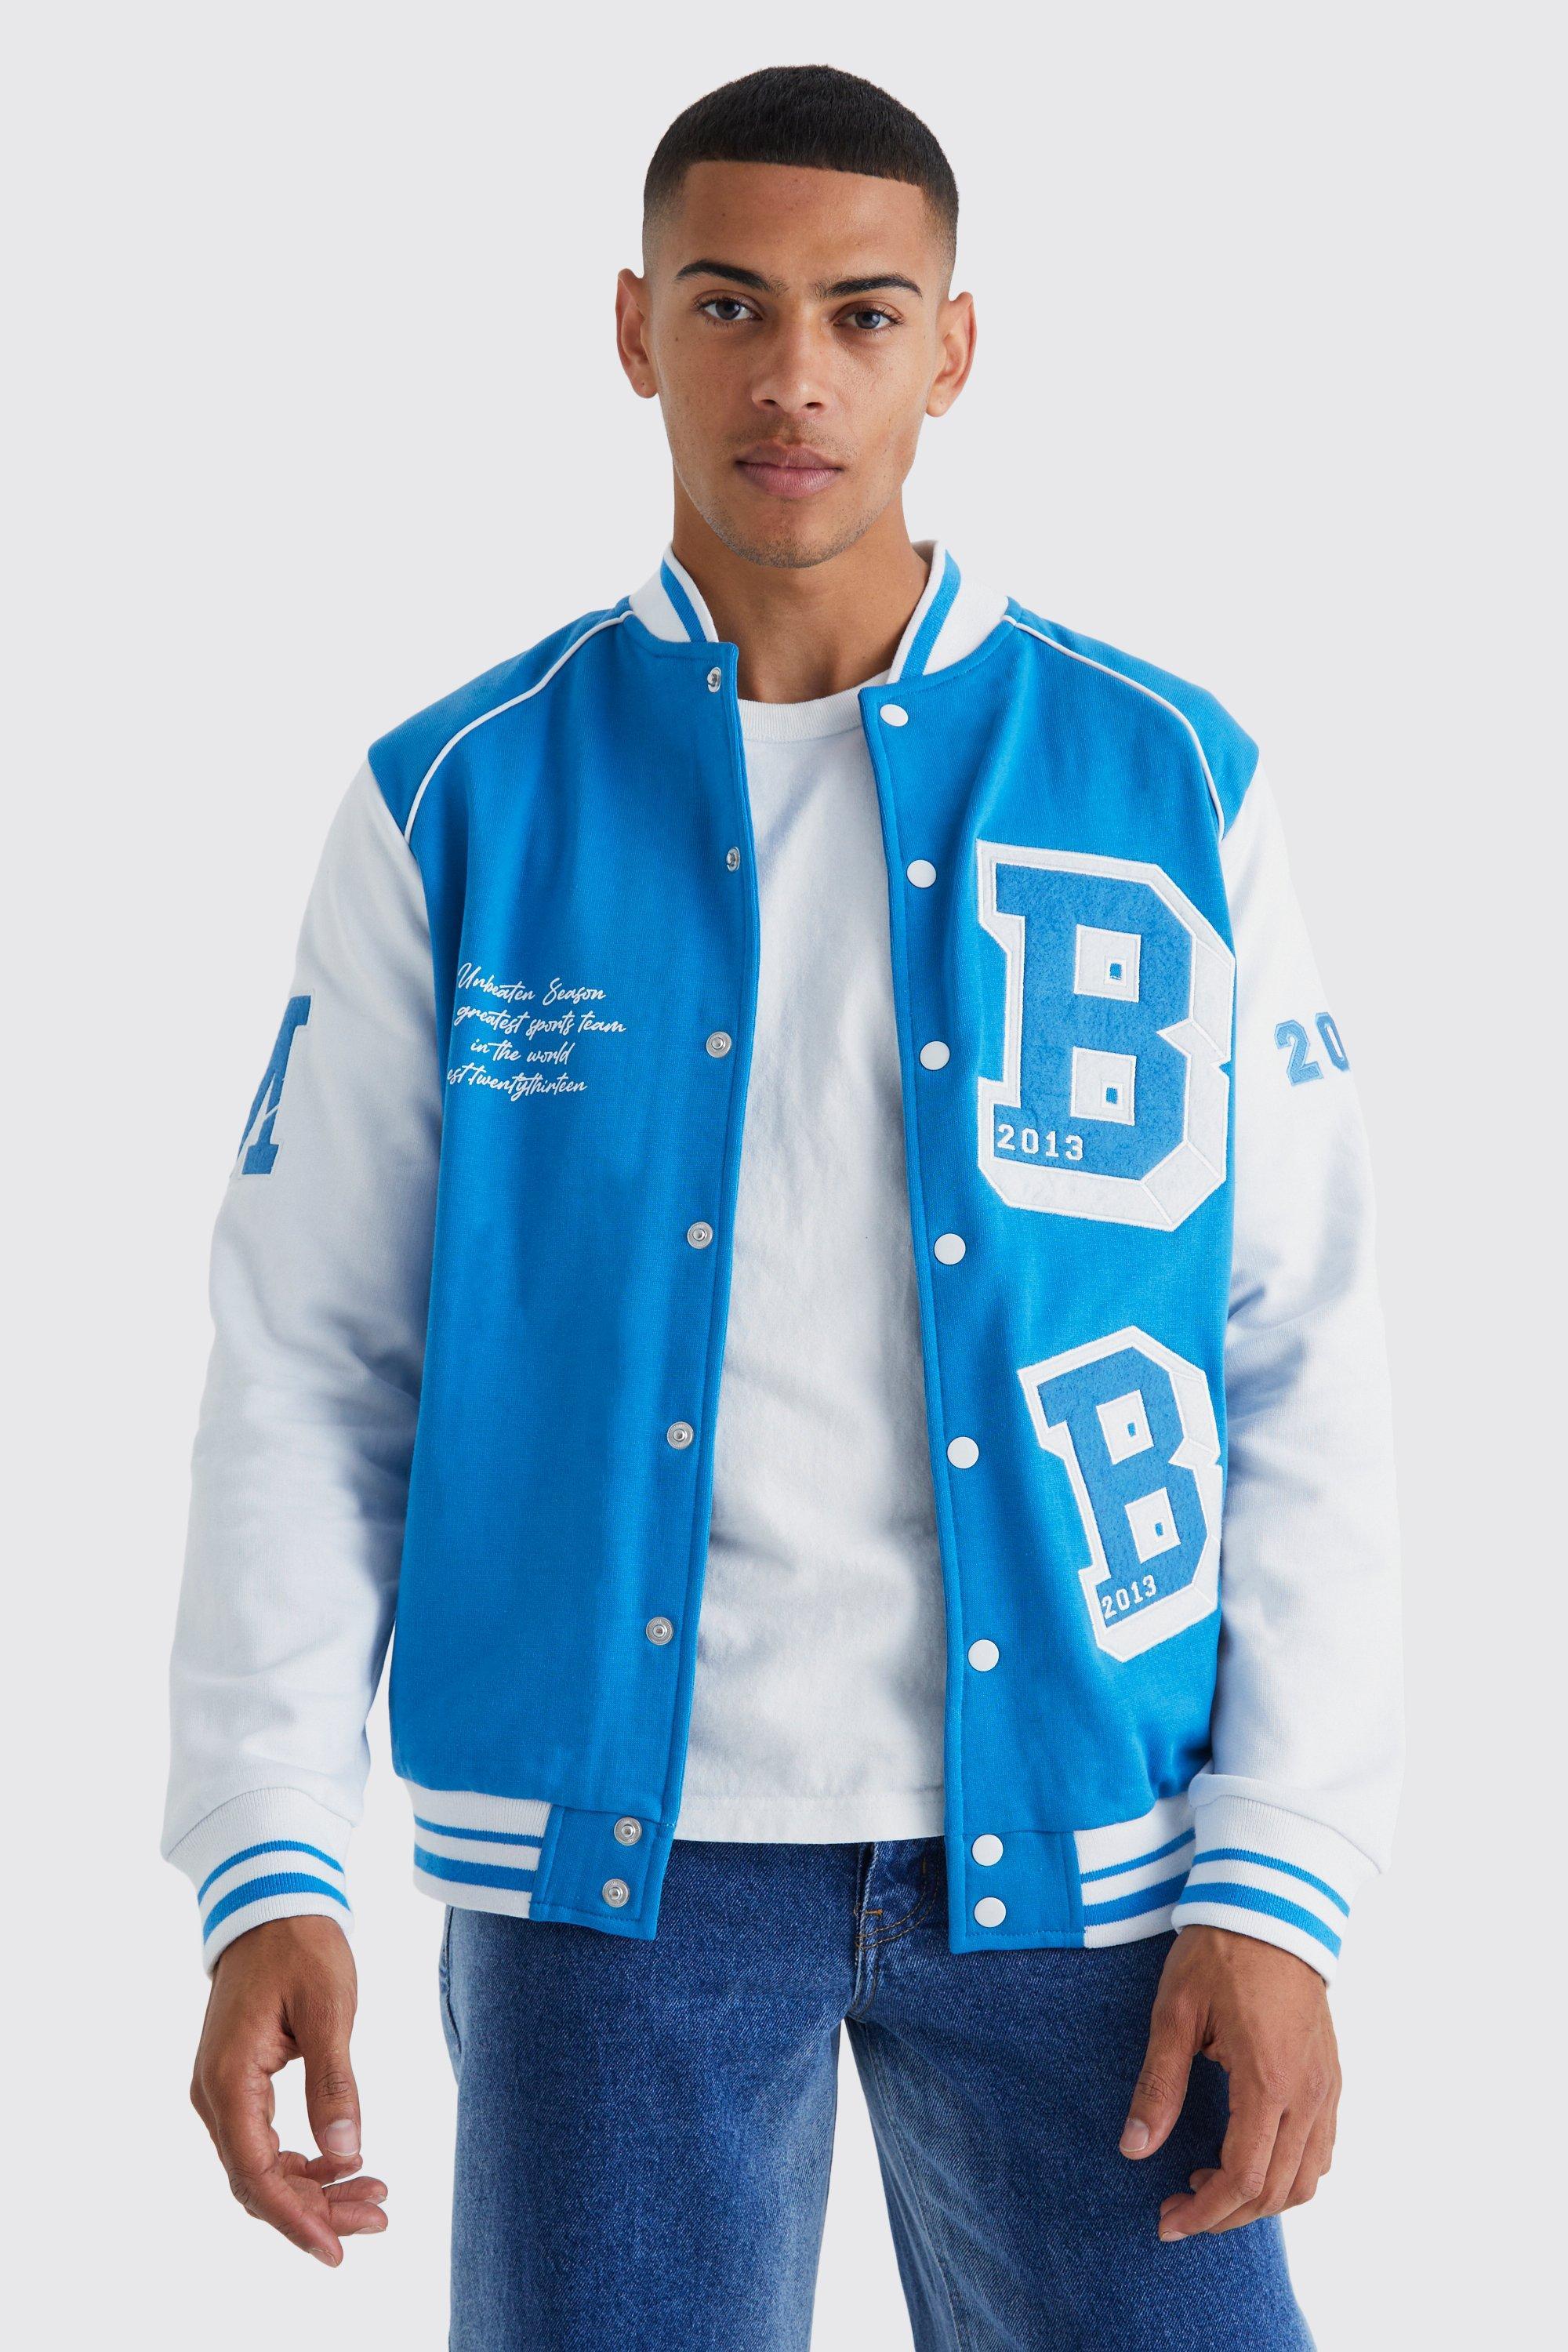 BoohooMAN Plus Red and White Cotton Jersey Bomber Varsity Jacket with Badges